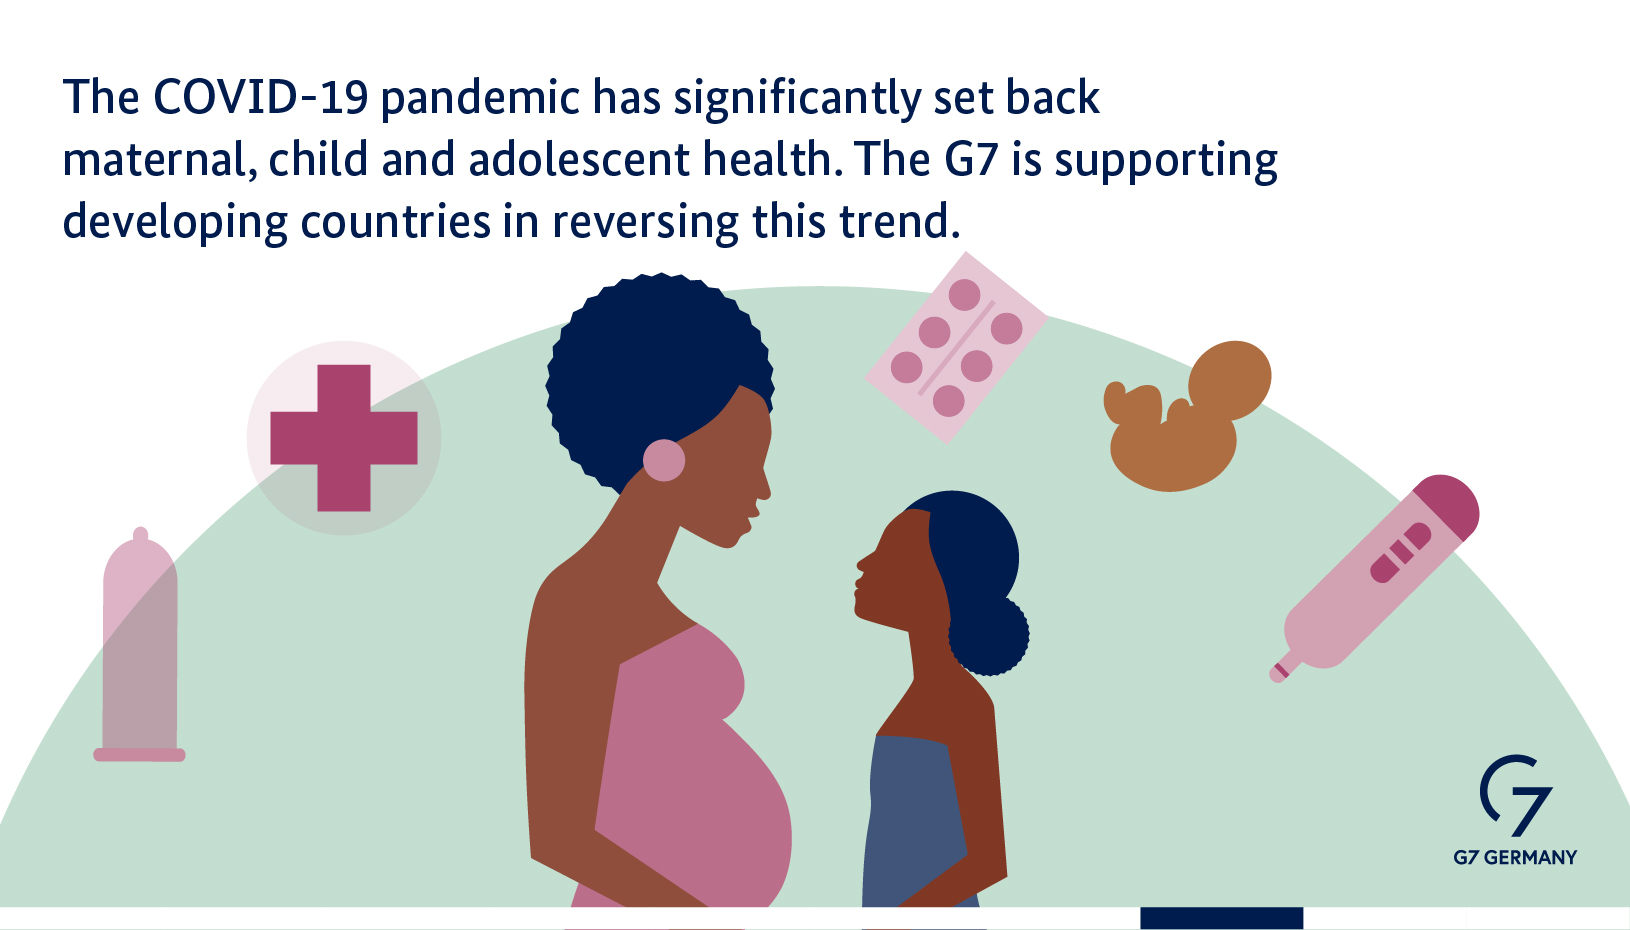 Maternal, child and adolescent health has regressed as a result of the Covid 19 pandemic. The G7 is supporting developing countries to reverse this trend.